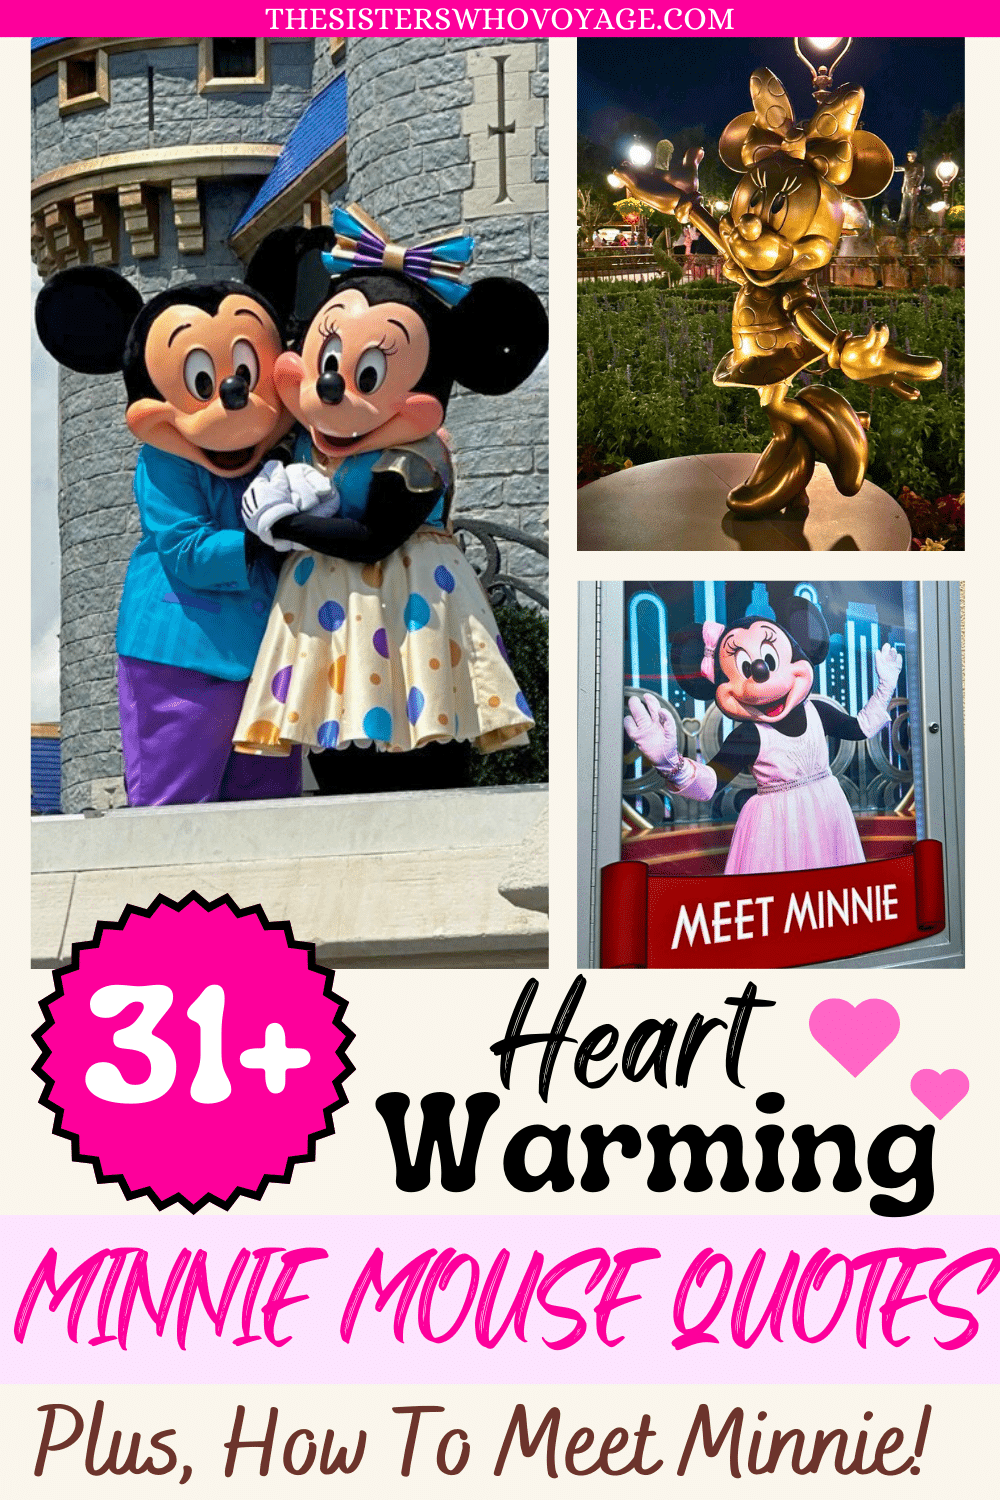 Minnie Mouse Quotes and Minnie mouse and mickey mouse hugging, Minnie statue, and meet Minnie poster